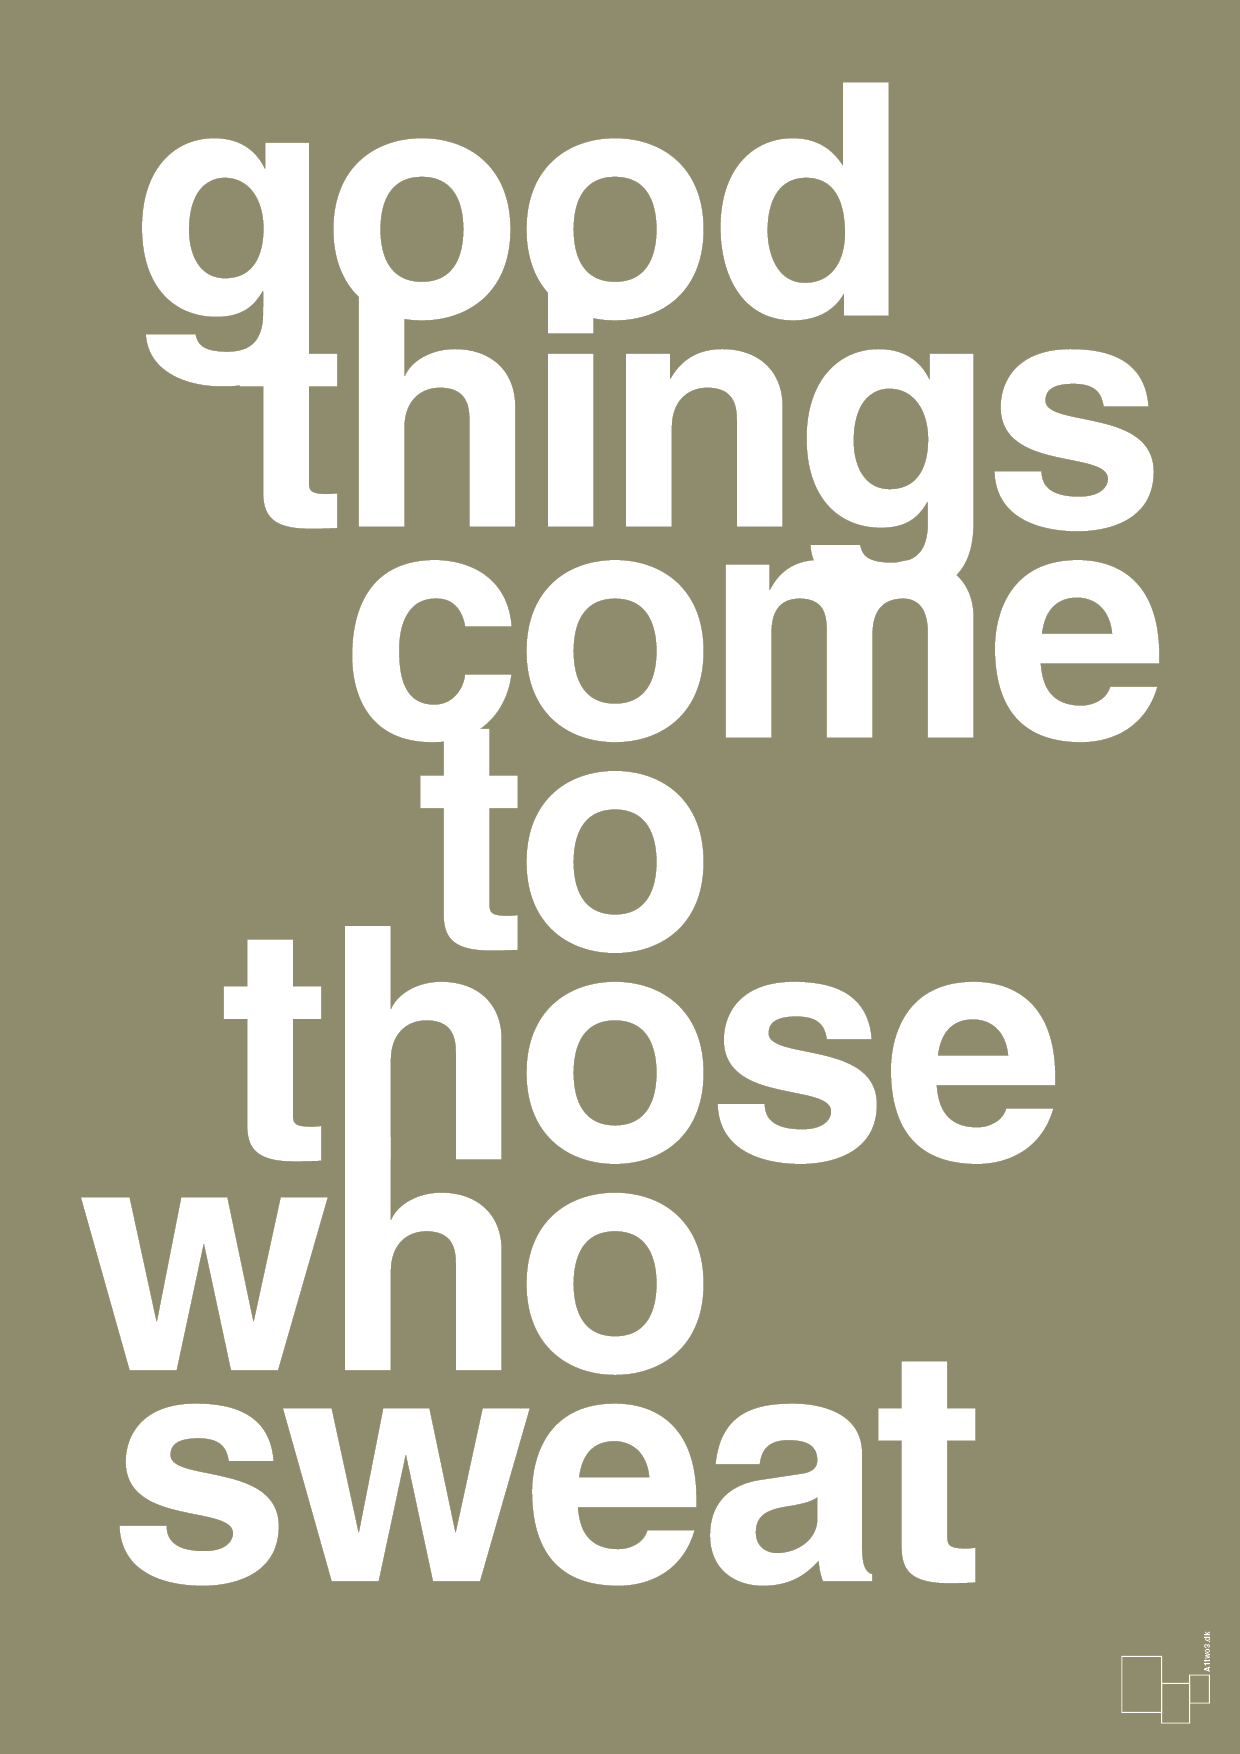 good things come to those who sweat - Plakat med Sport & Fritid i Misty Forrest